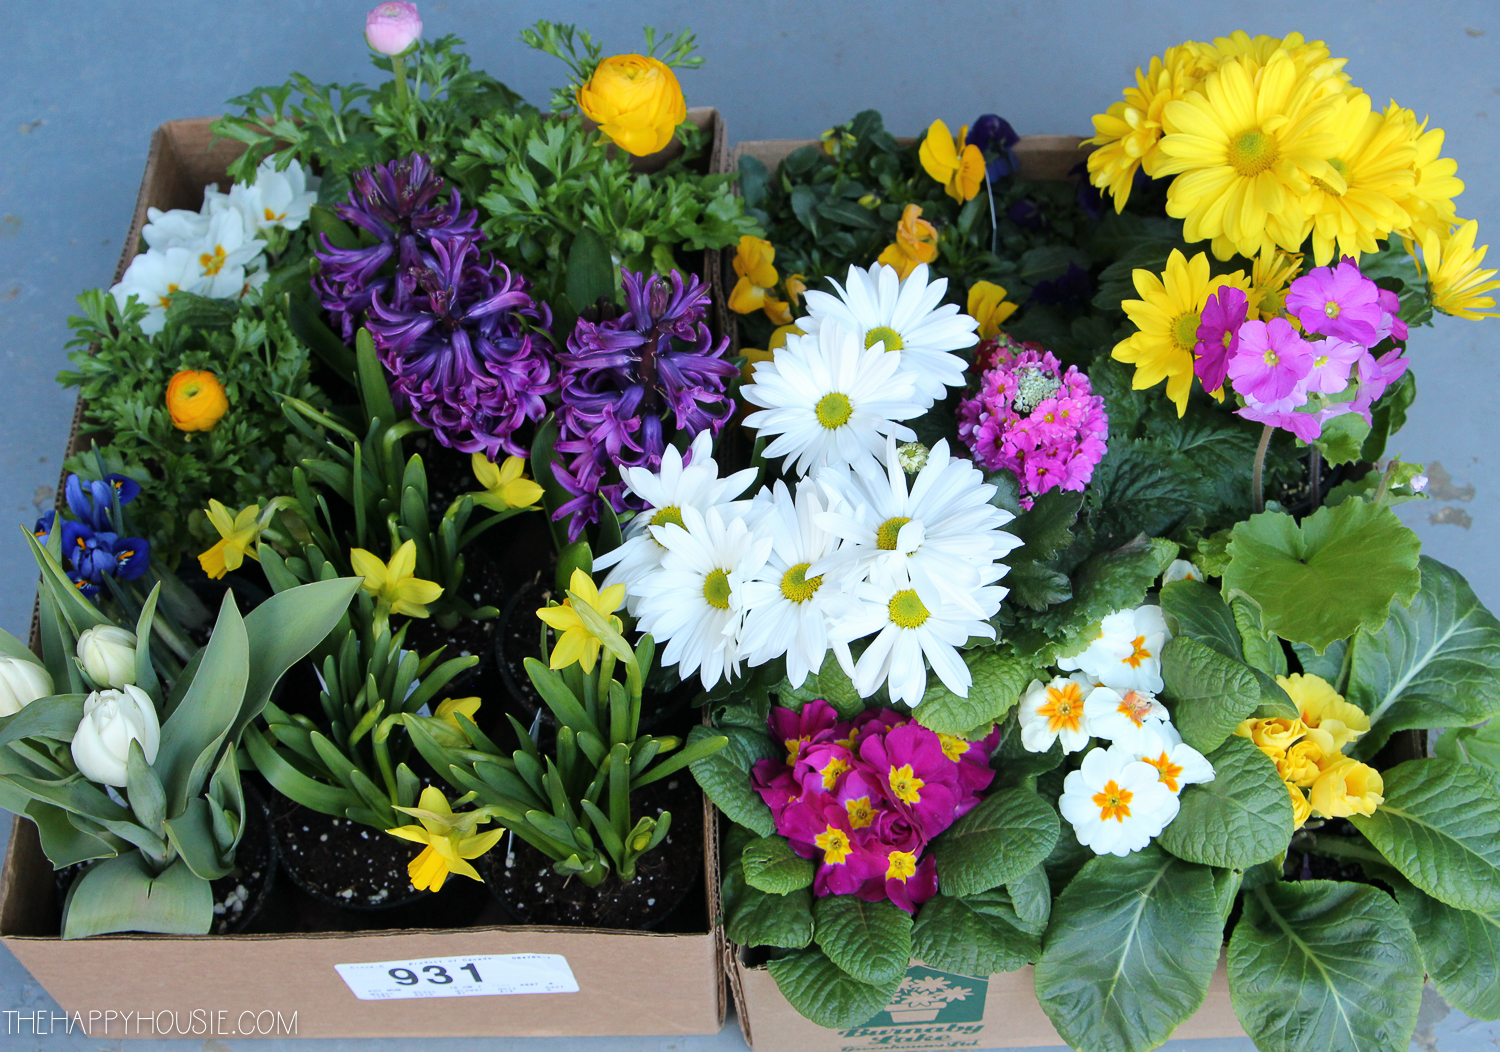 A box full of spring flowers.